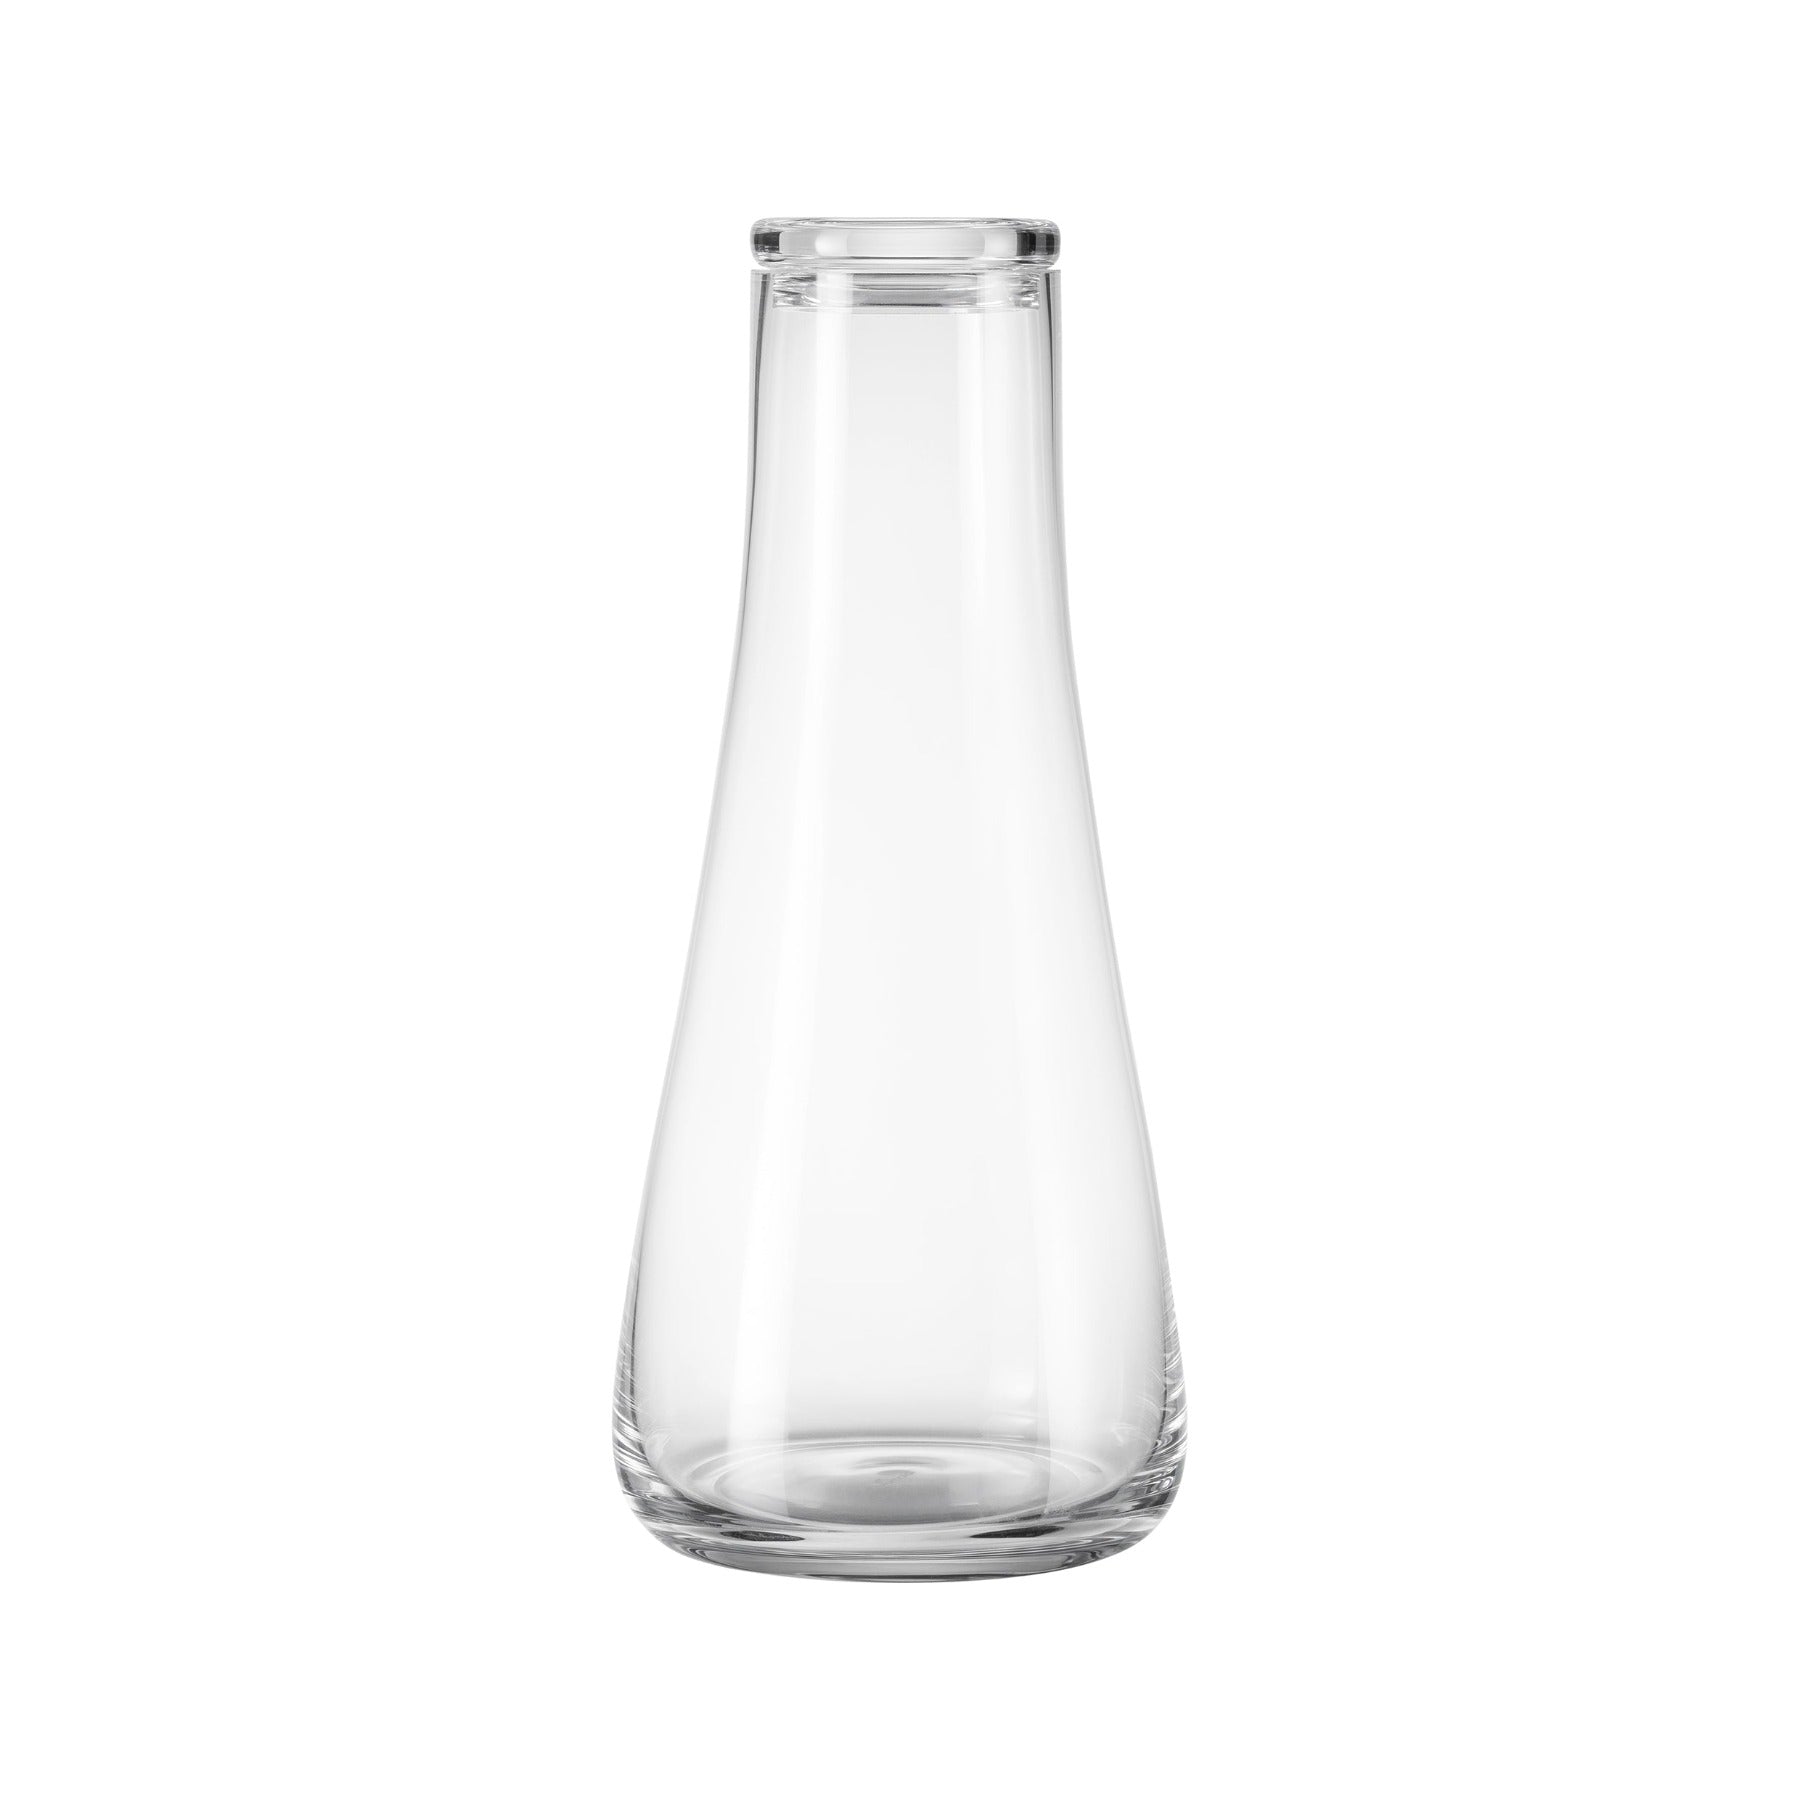 blomus Belo Water Carafe, Colored Glass, Coffee, 40 oz. on Food52